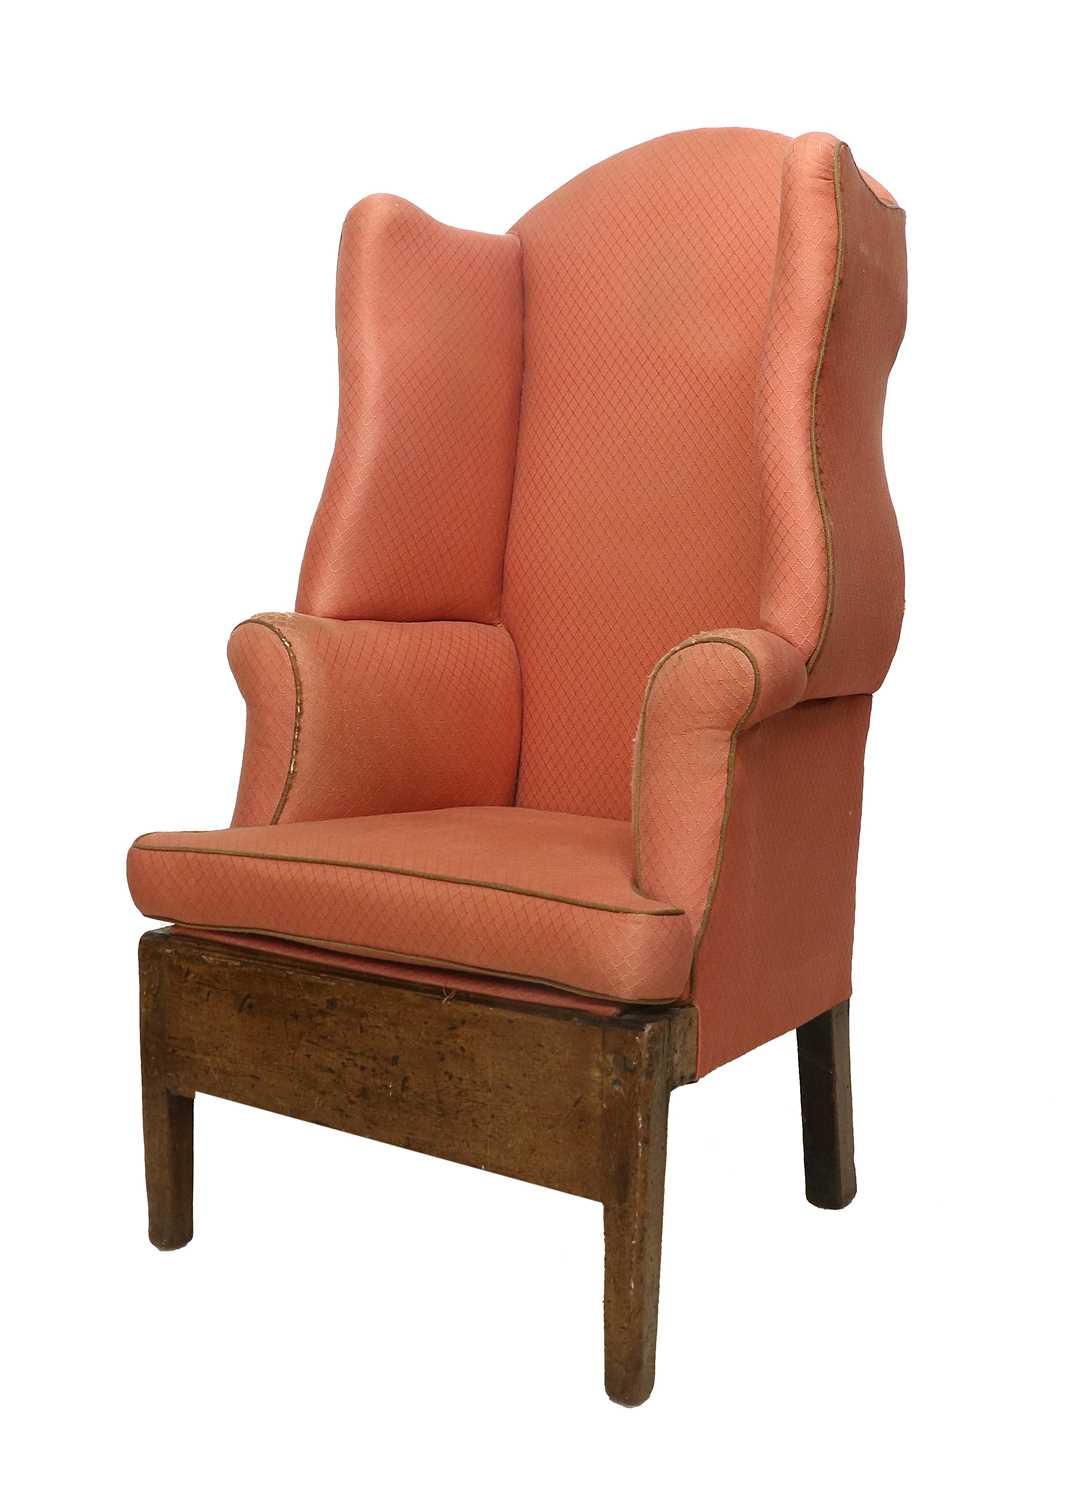 An Early 19th Century Wingback Armchair, recovered in worn pink geometric patterned fabric, the - Image 2 of 2